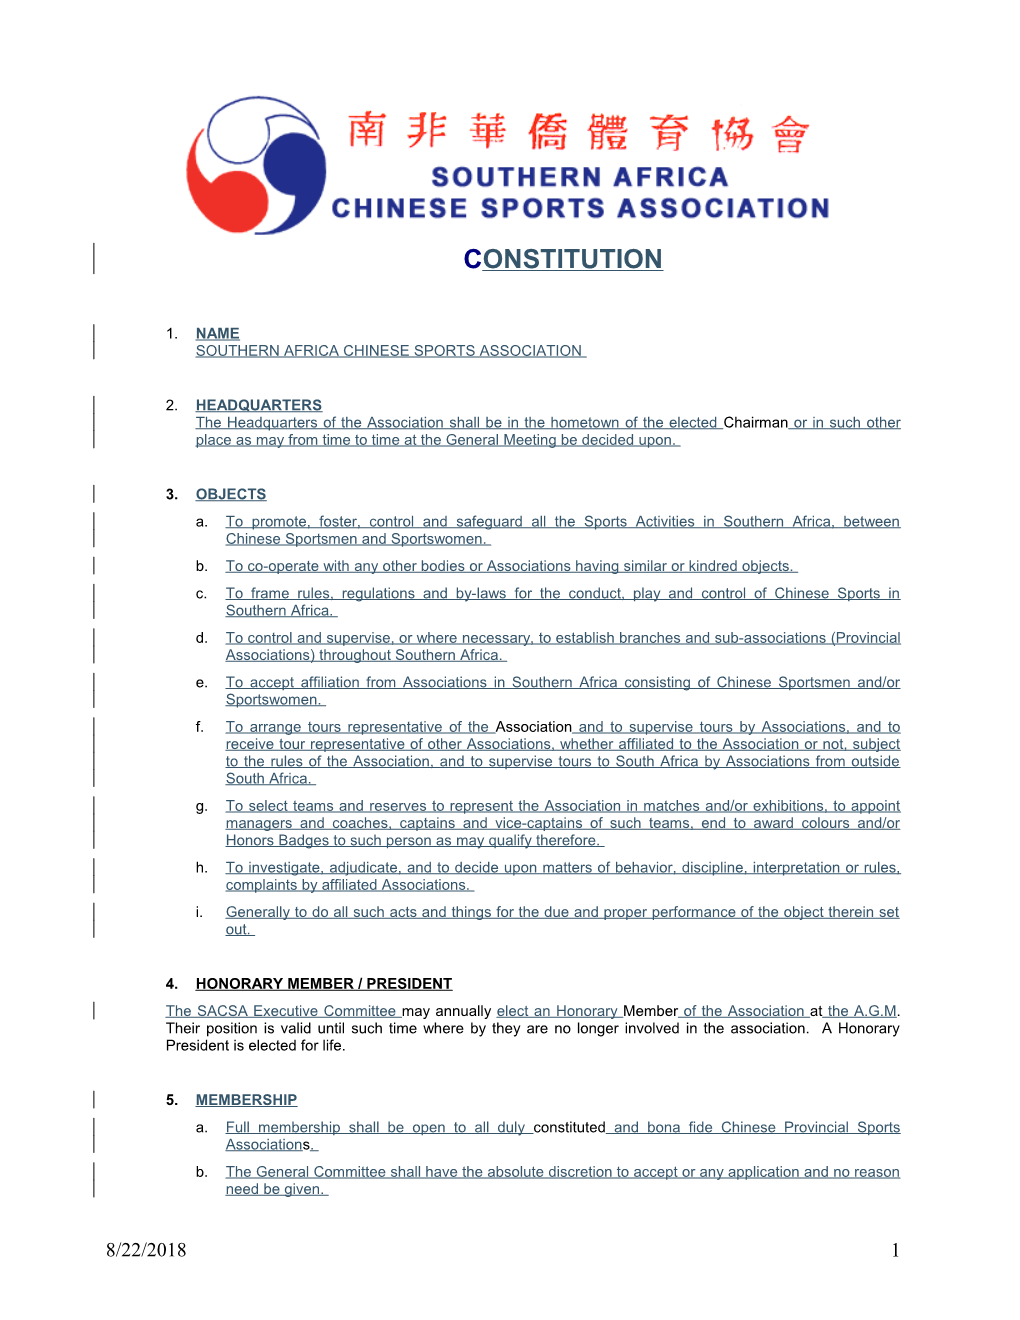 Name Southern Africa Chinese Sports Association